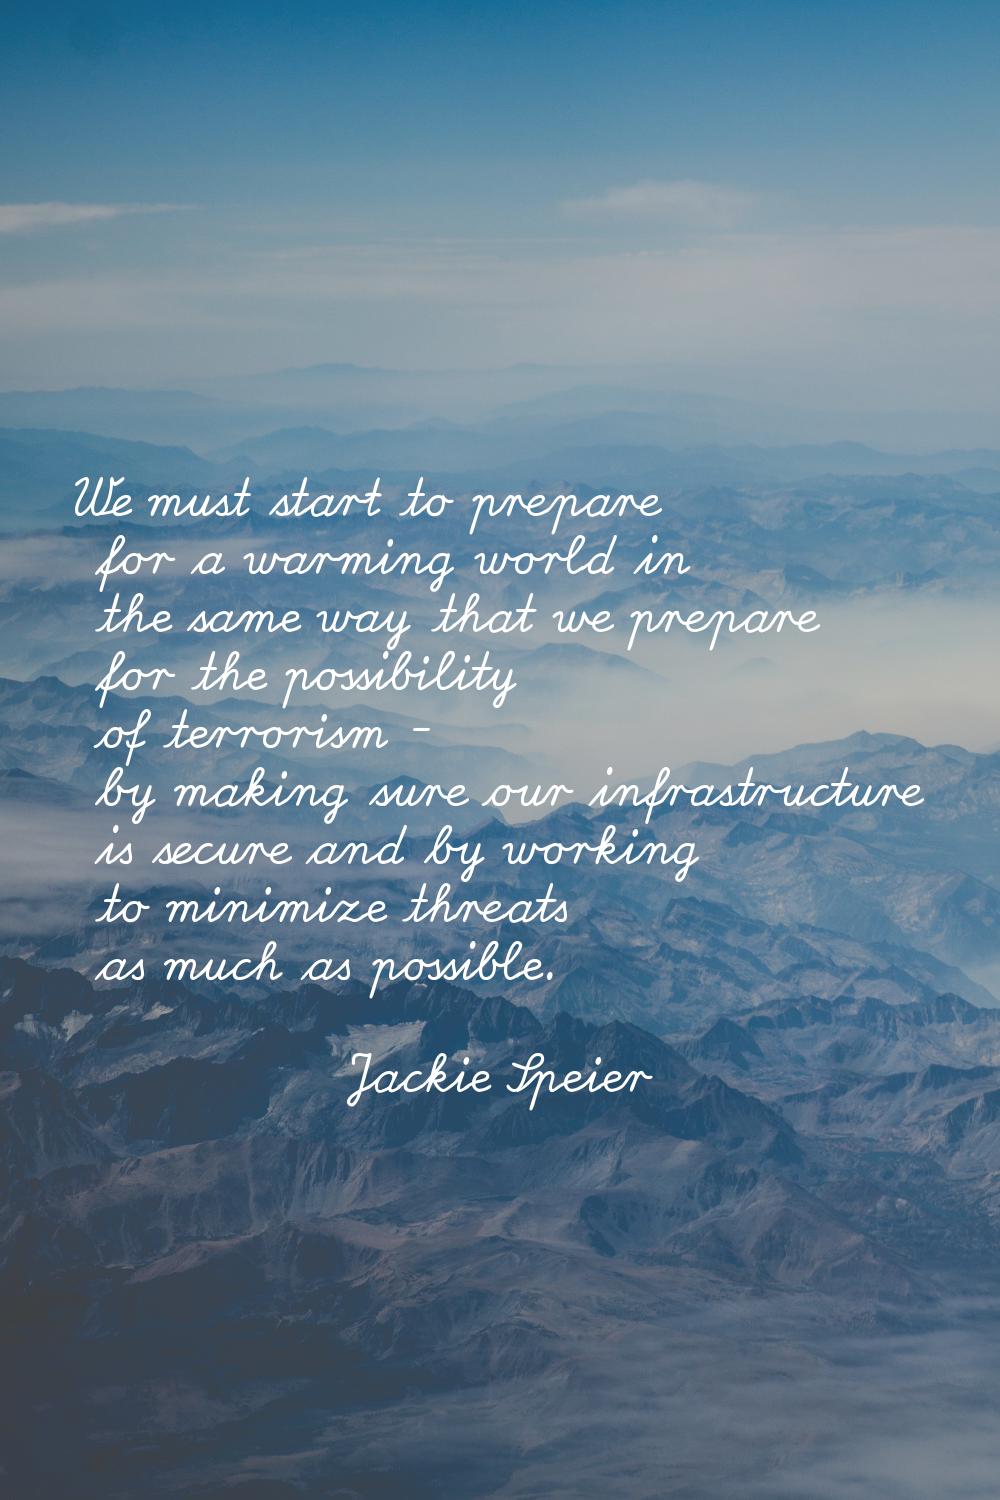 We must start to prepare for a warming world in the same way that we prepare for the possibility of